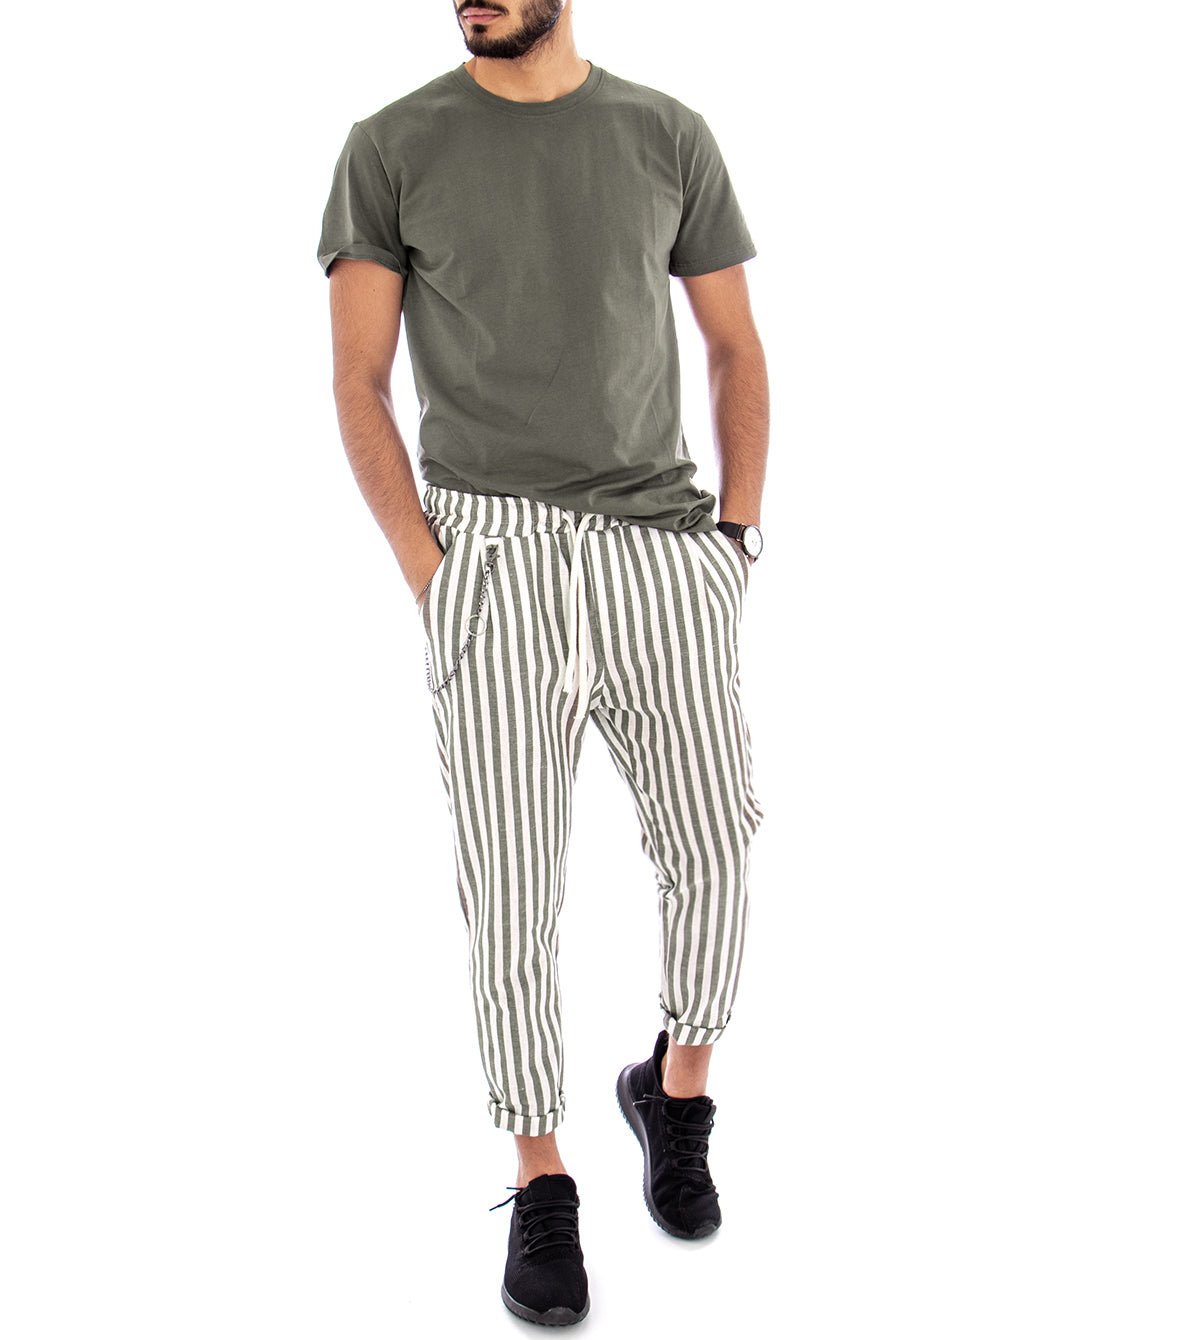 Men's Linen Trousers Striped Elastic Low Crotch Green Casual Tracksuit Trousers GIOSAL